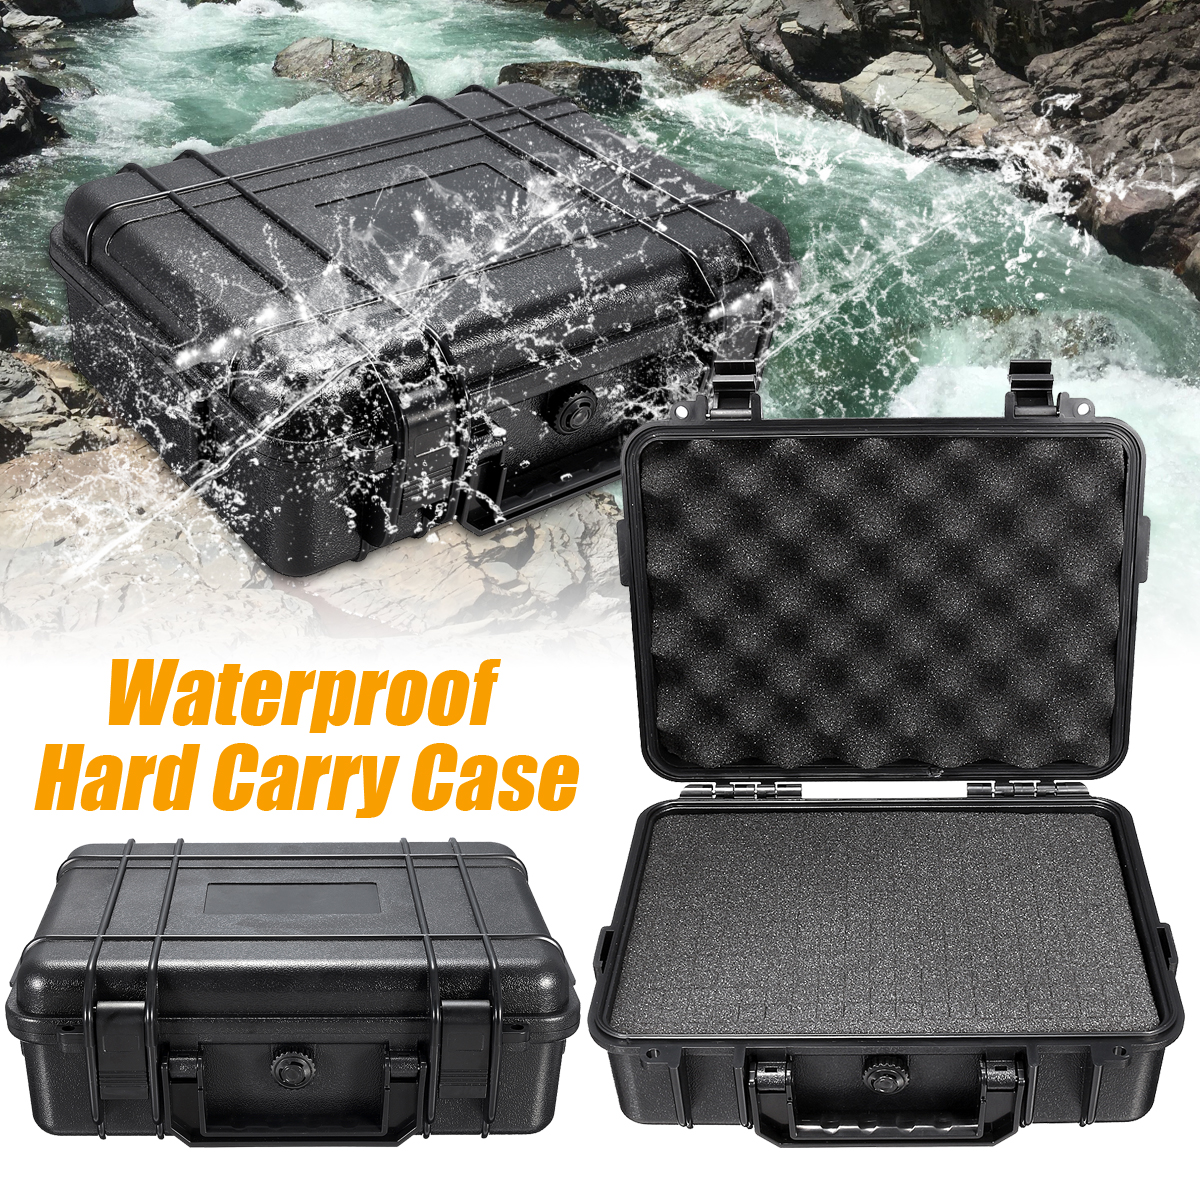 Waterproof-Hard-Carry-Tool-Case-Bag-Storage-Box-Camera-Photography-with-Sponge-1636226-1